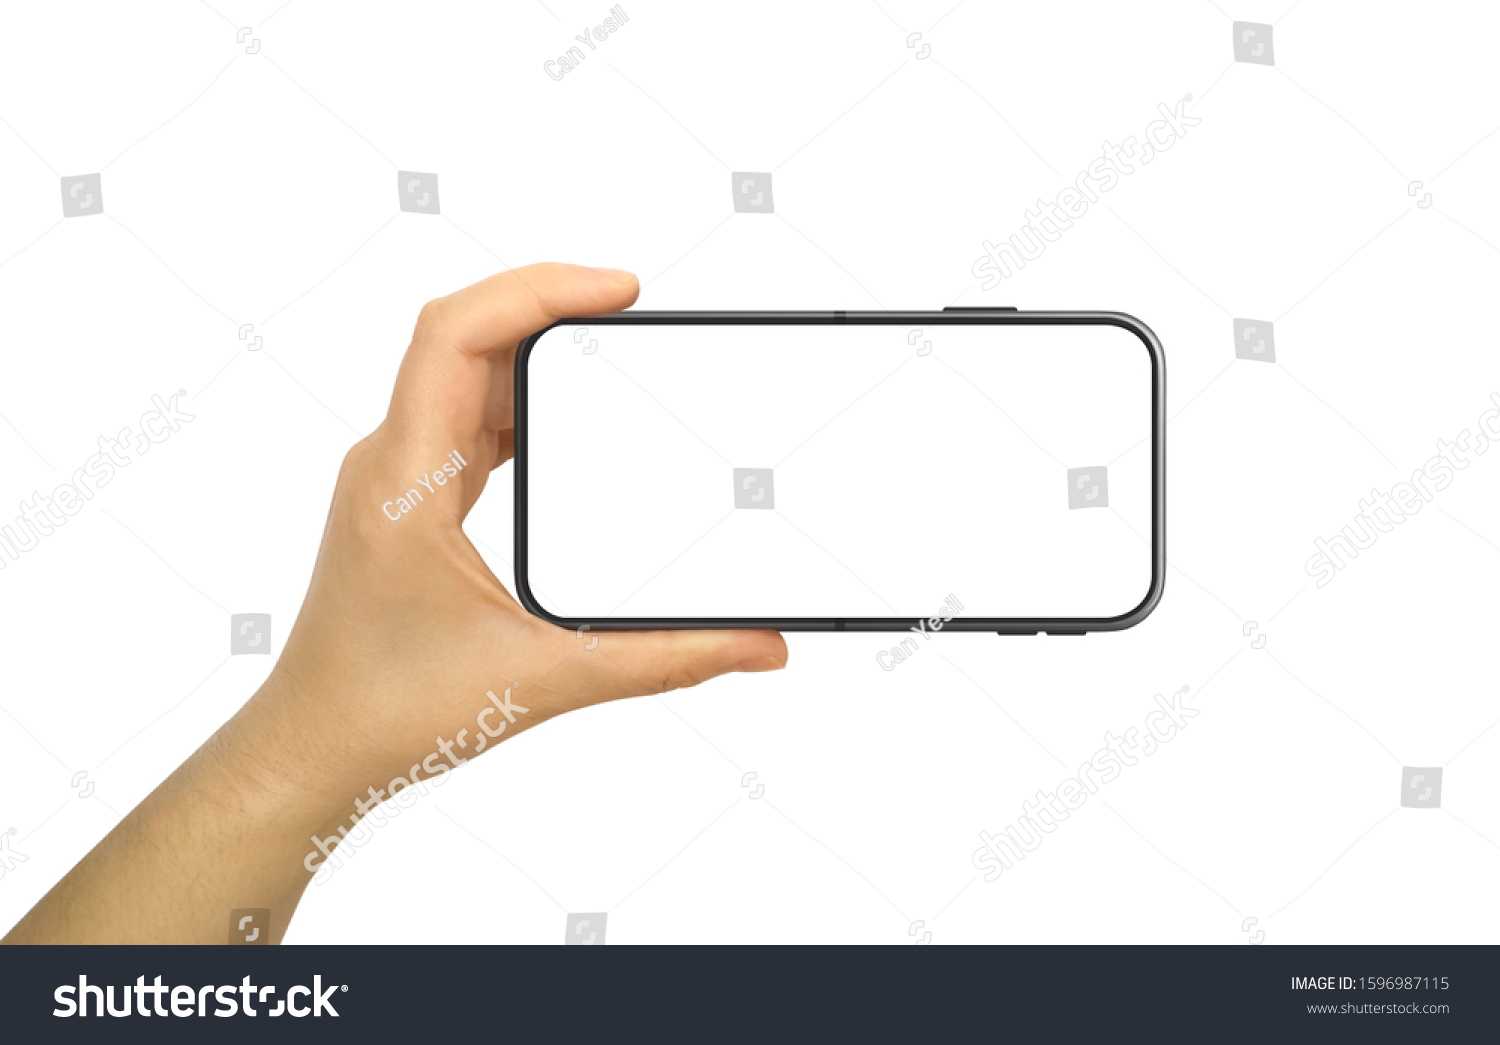 Hand Holding Horizontal Mobile Phone With Blank and White Screen #1596987115